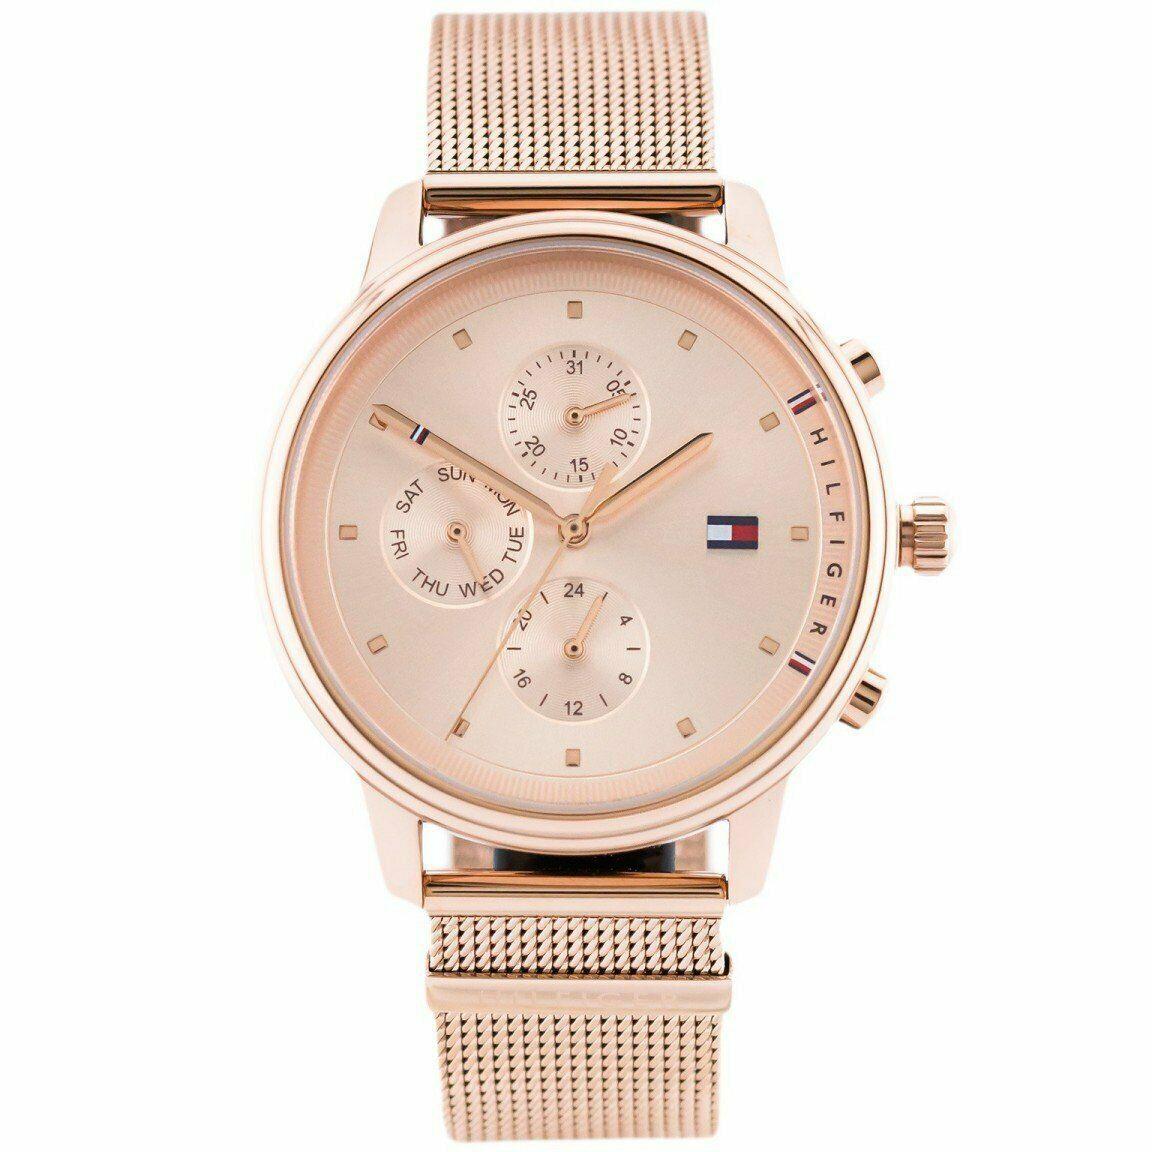 Tommy Hilfiger 1781907 RoseGold Mesh Stainless Steel Chronograph Watch For Women - RoseGold